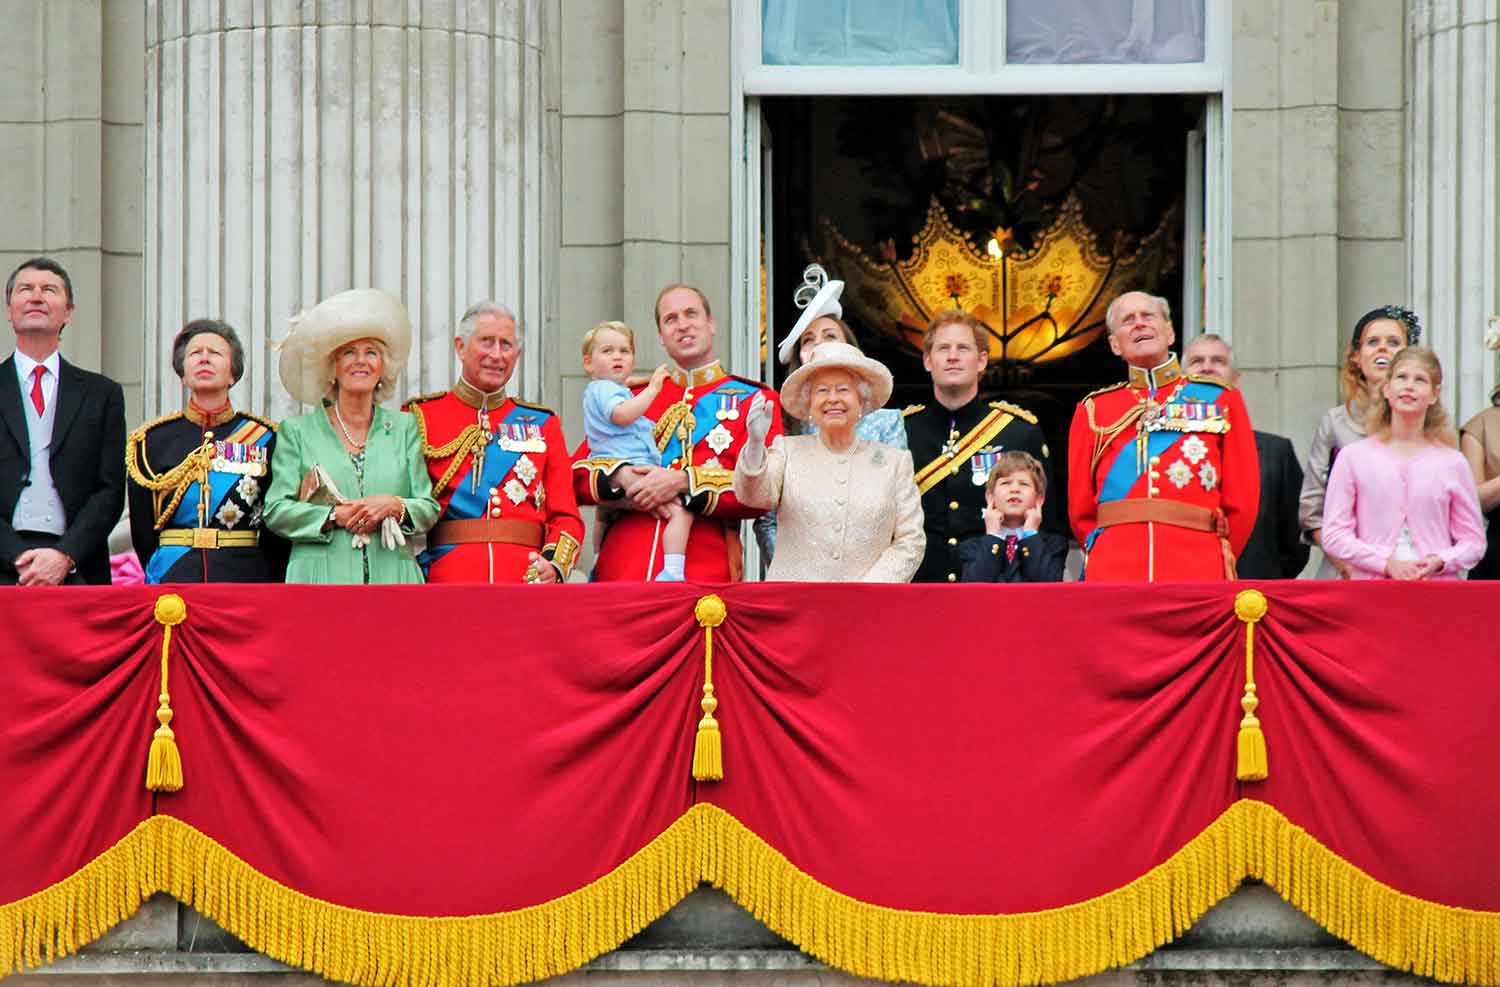 The queen and other members of the royal family are dressed formally as they stand on a balcony and smile.